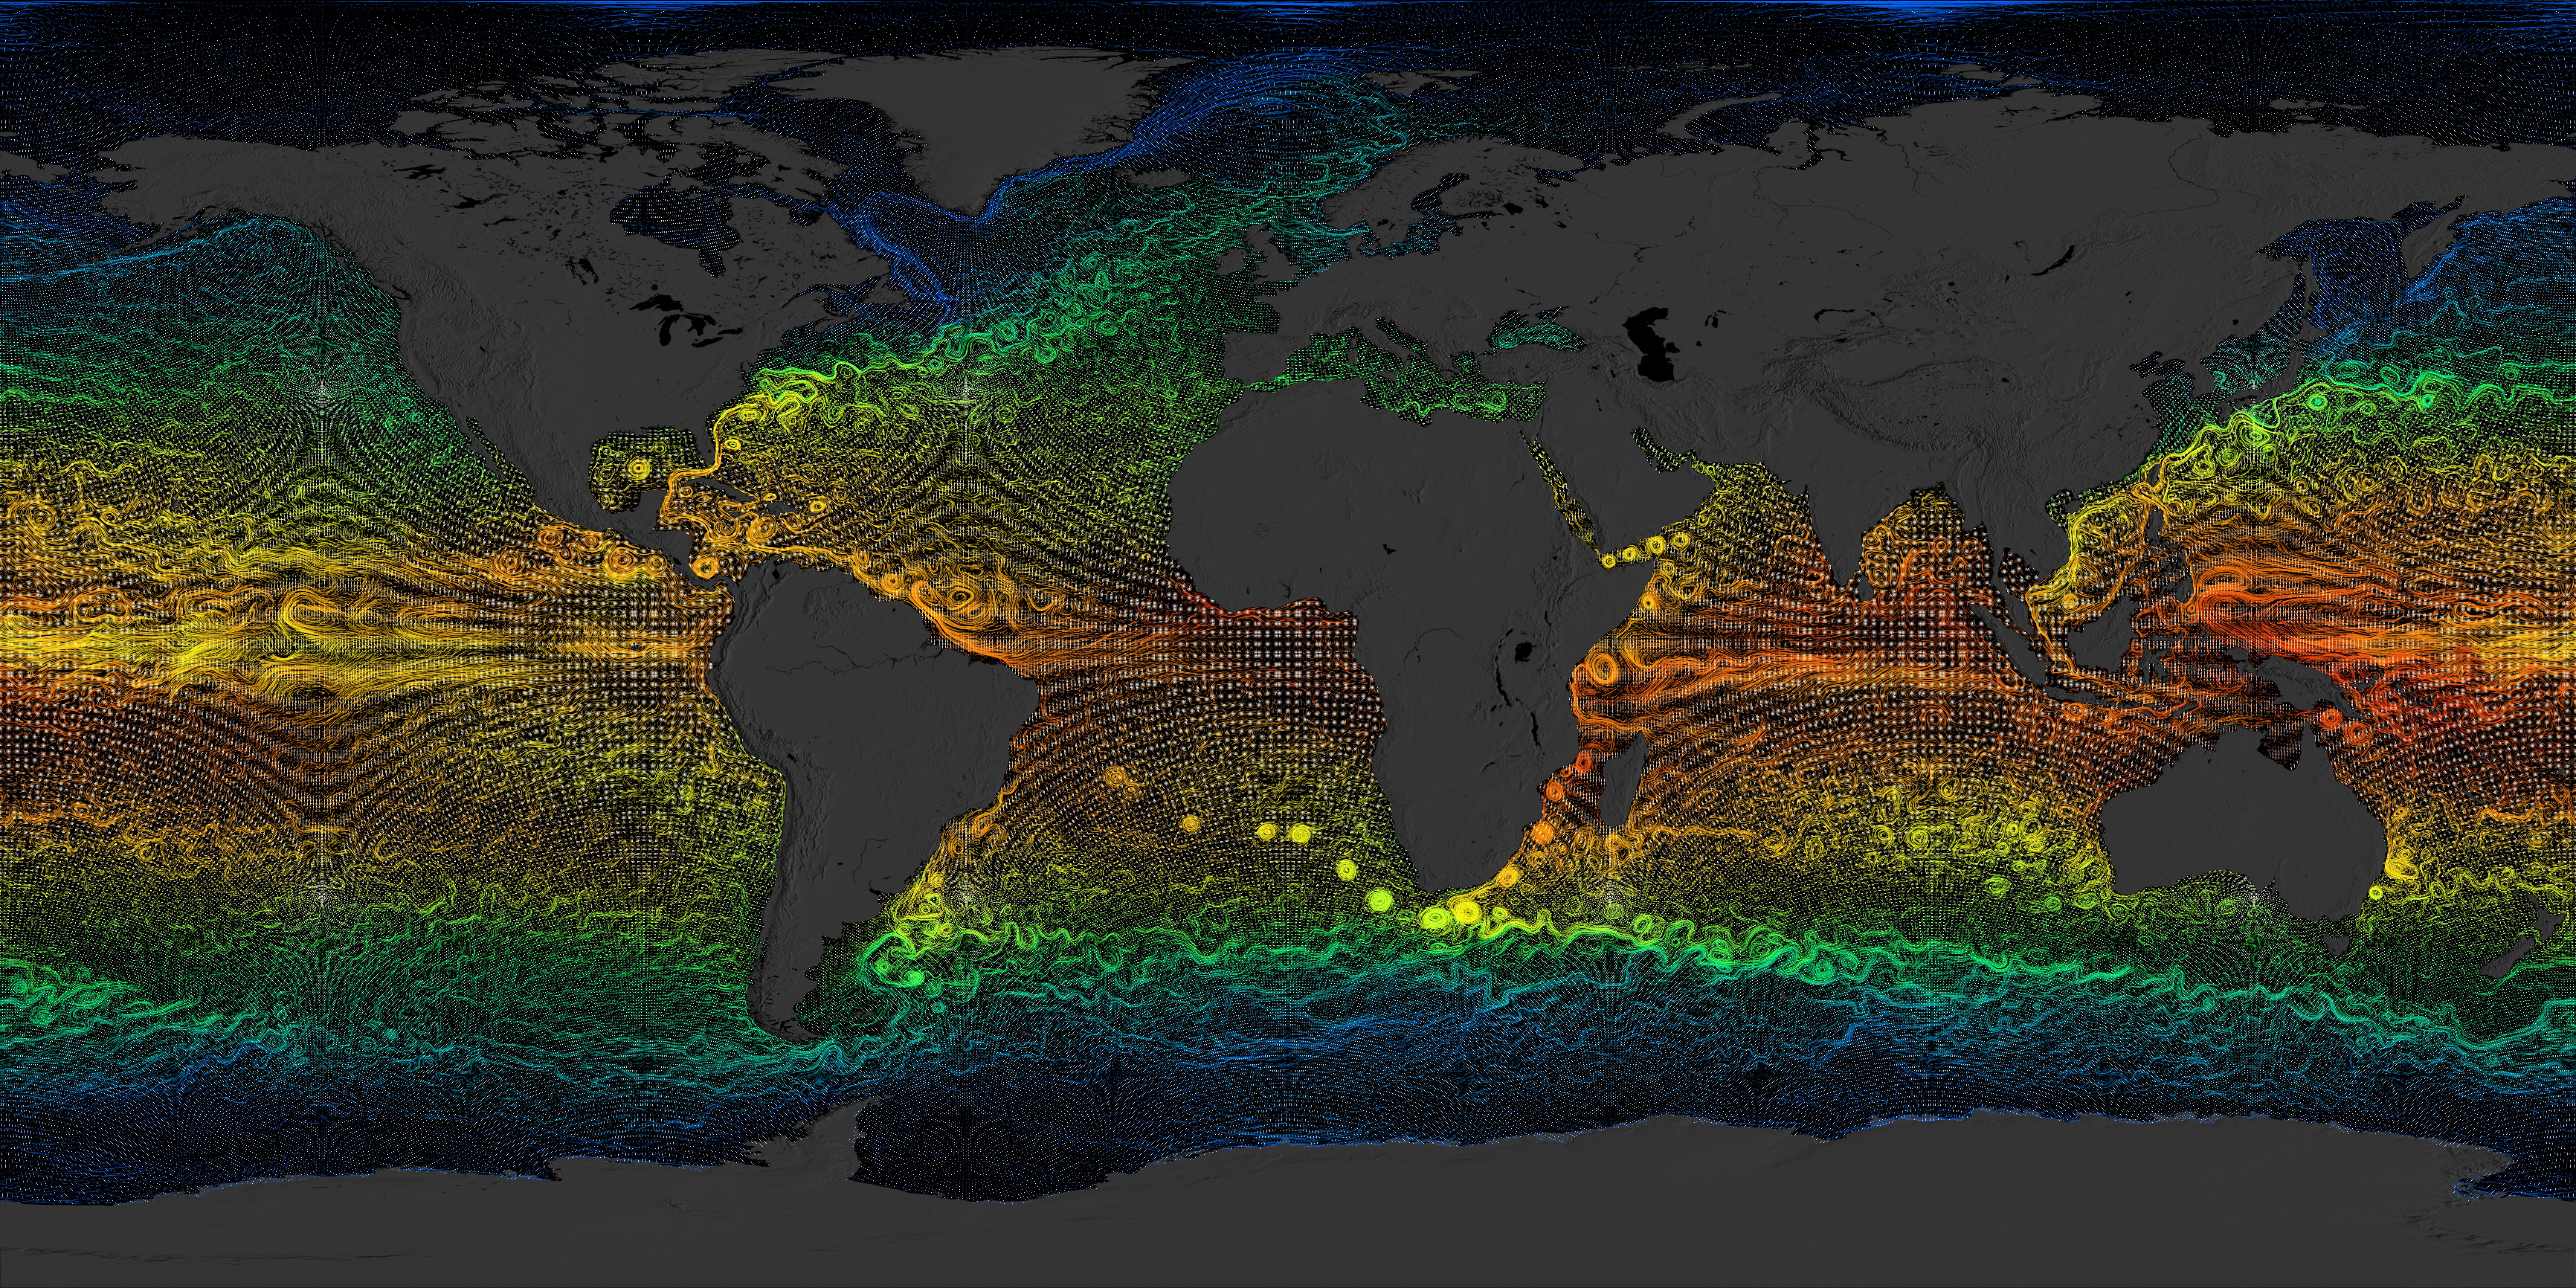 Full resolution ECCO2 flow field illustrating the distribution of the actual flow vector data points relative to the flow curves. The white dots represent locations where the ECCO2 model defines the ocean current directions. Locations in between those locations are interpolated.